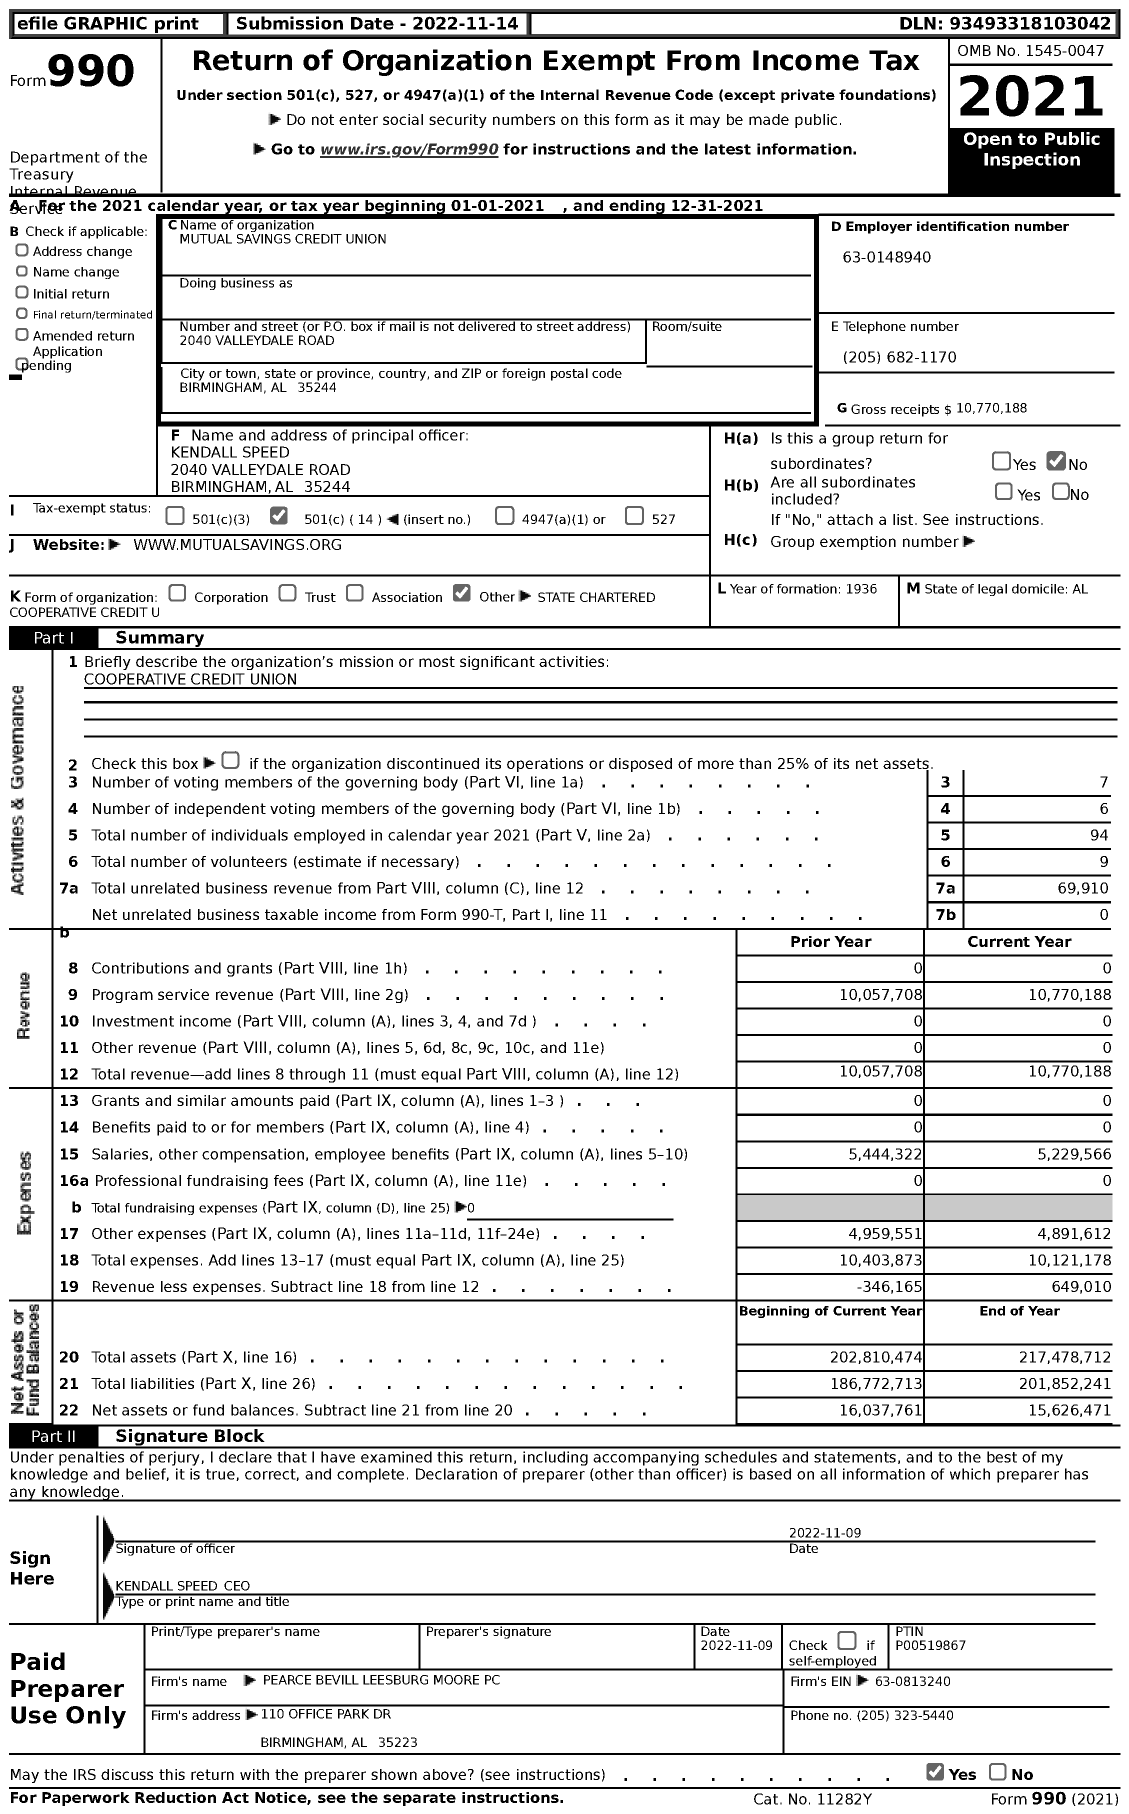 Image of first page of 2021 Form 990 for Mutual Savings Credit Union